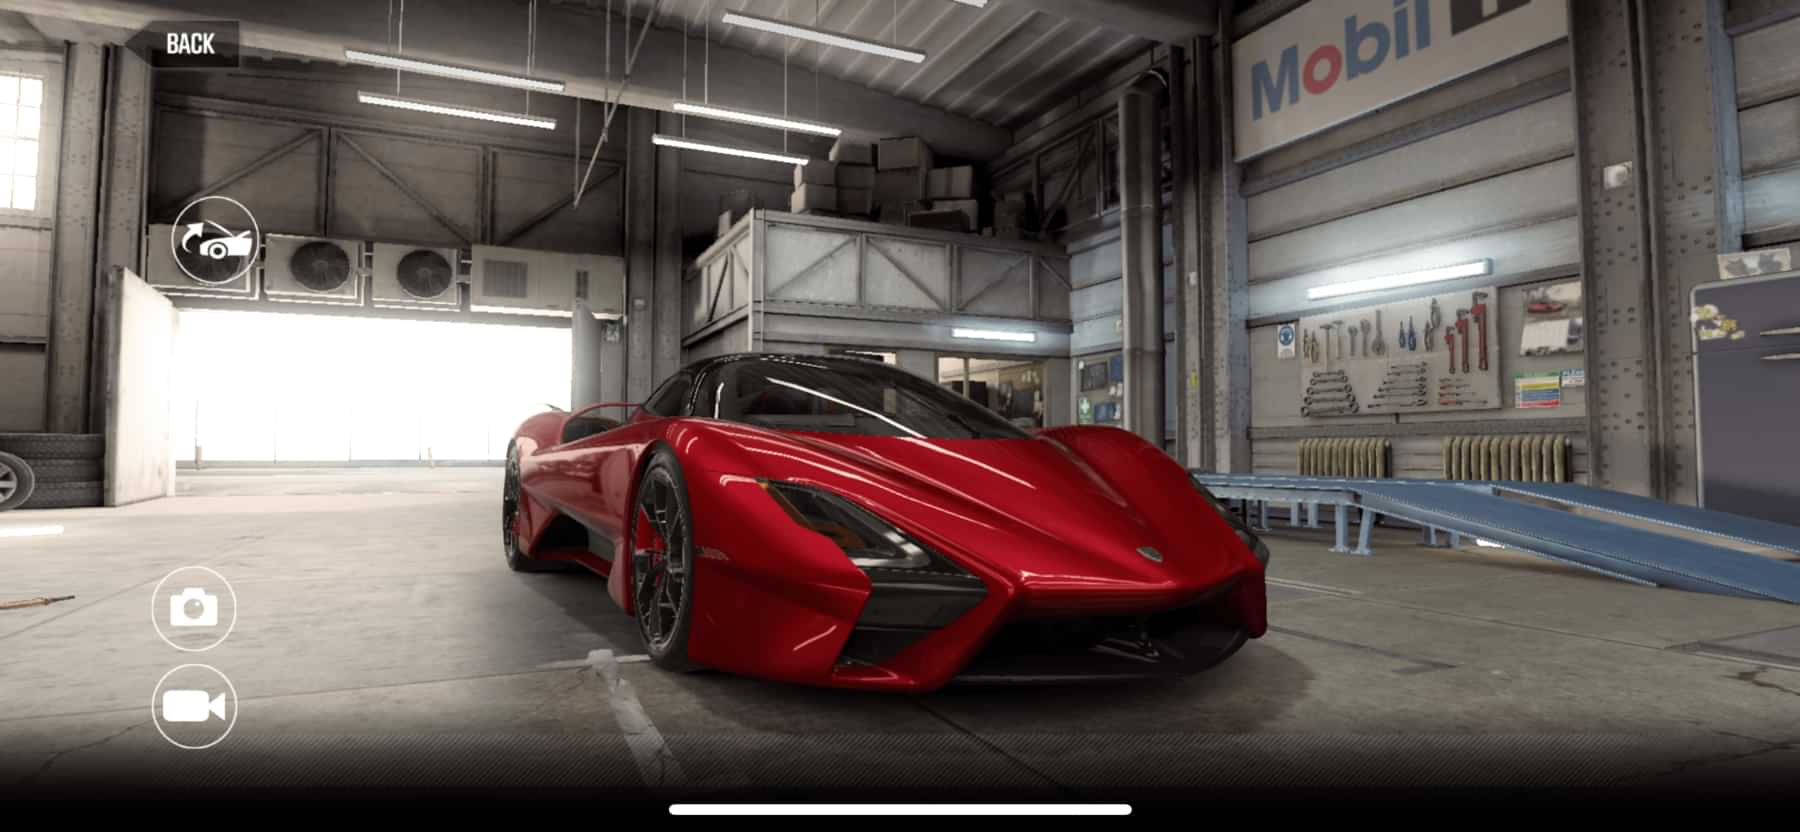 csr2 can't connect to server – Connectivity Issues